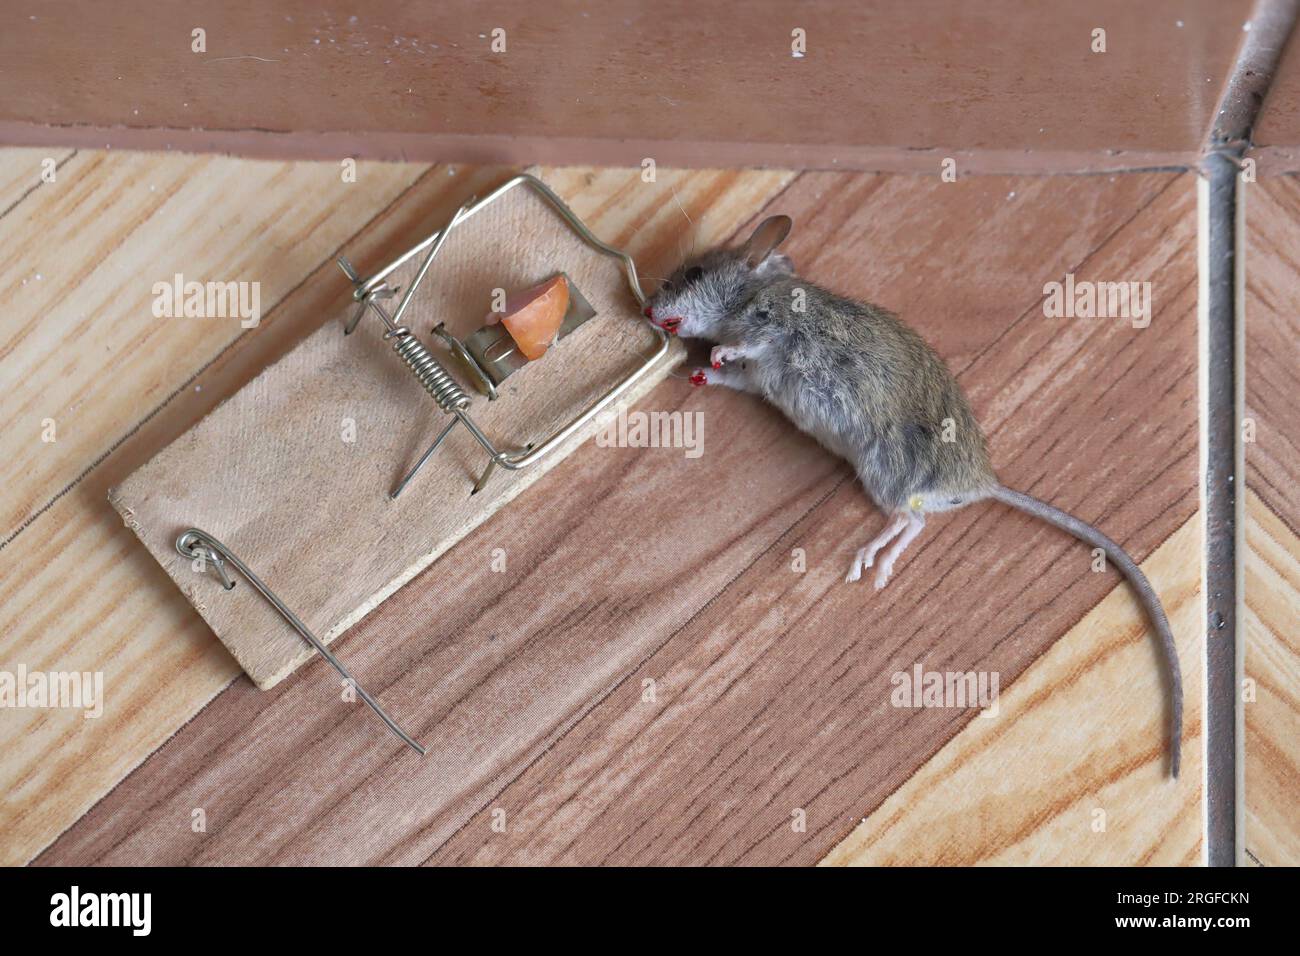 Dead mouse caught in a trap in a house, apartment. Stock Photo